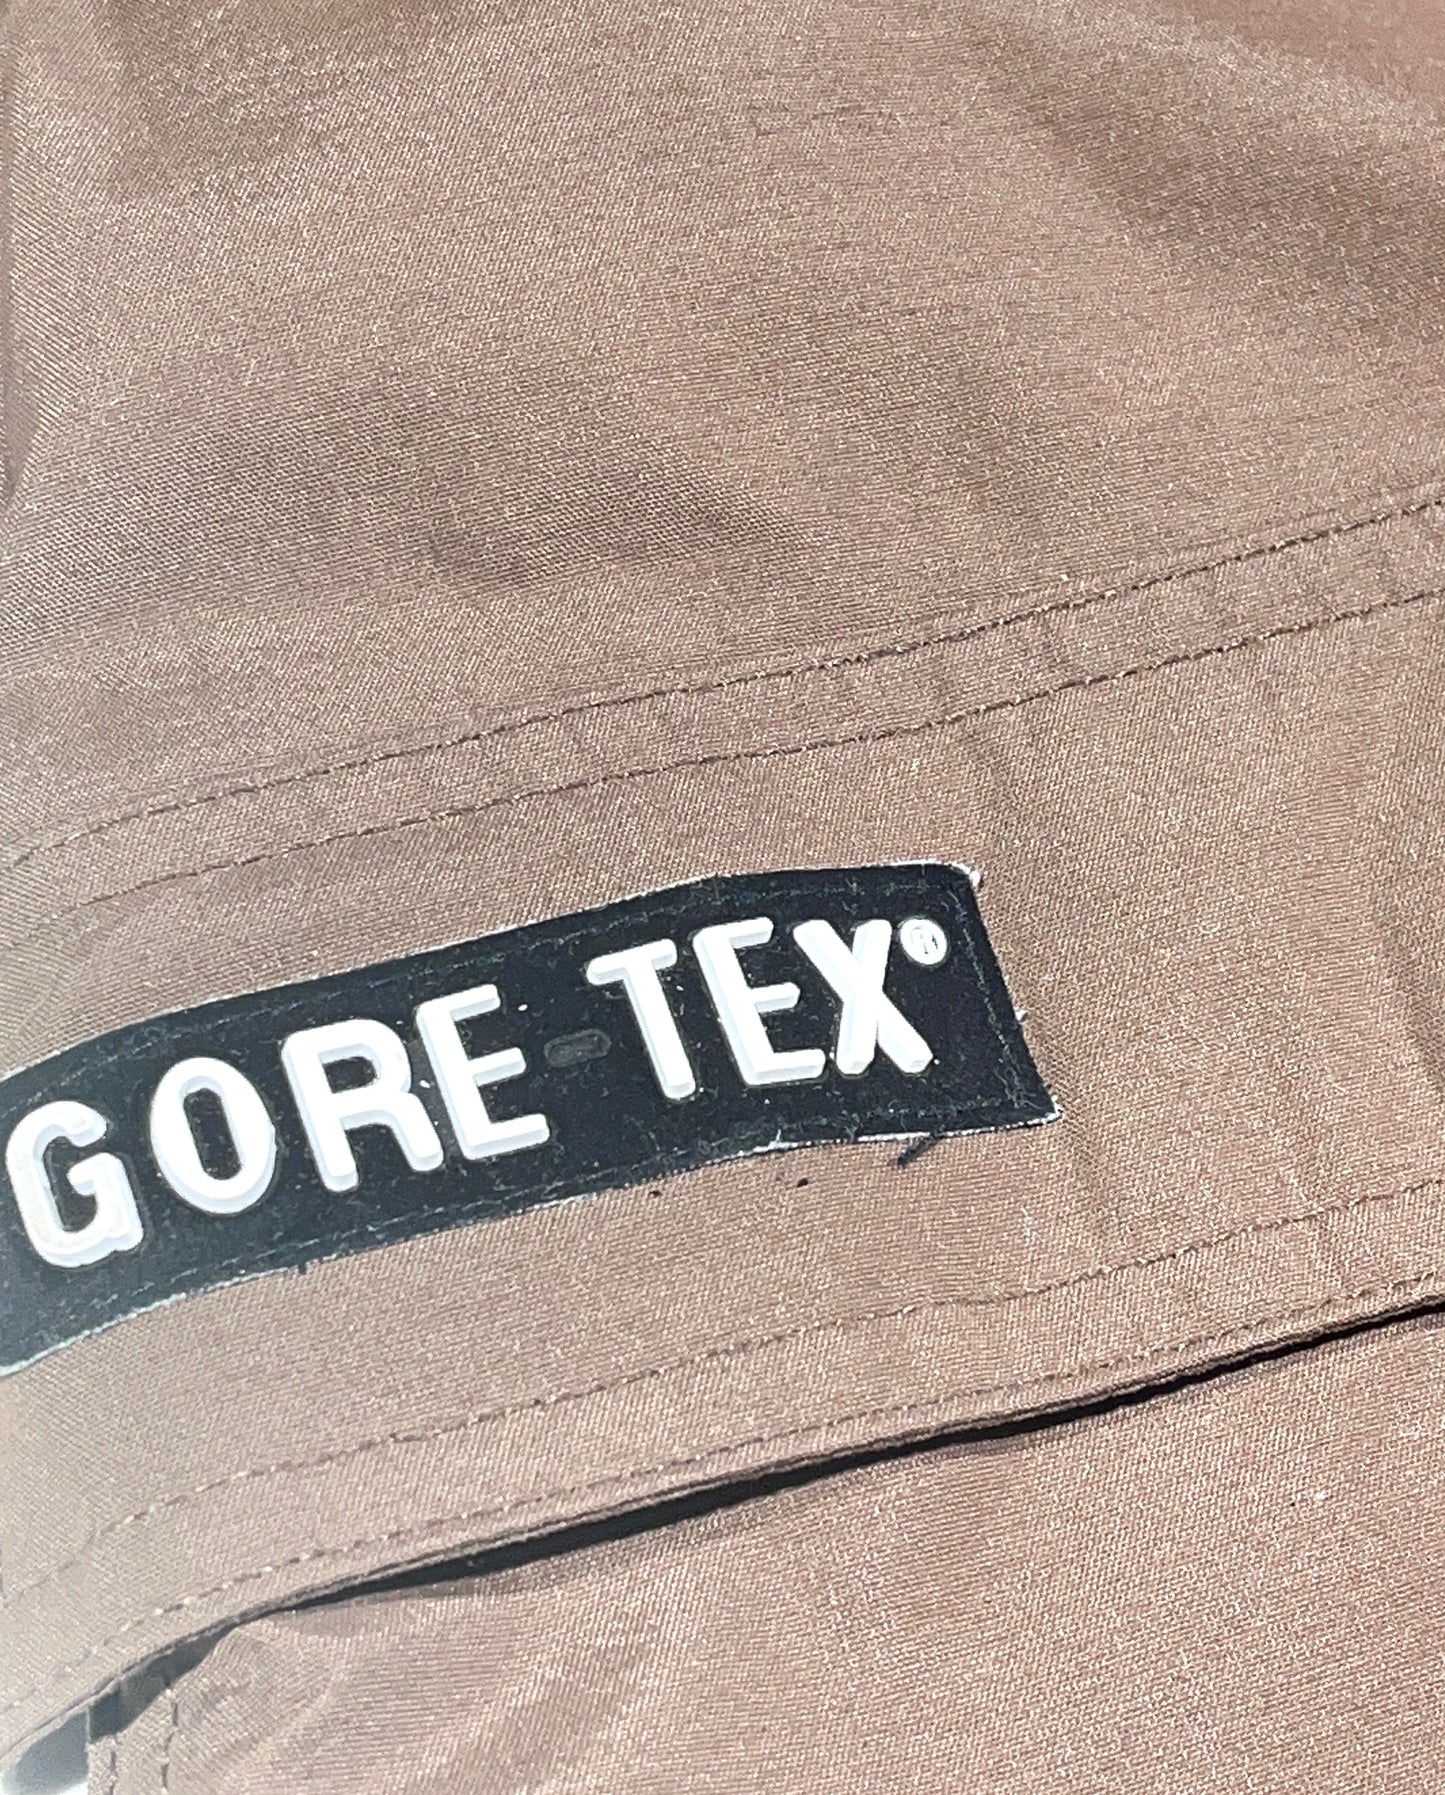 Vintage Gore-Tex Pants Ski Farwest Cargo Insulated